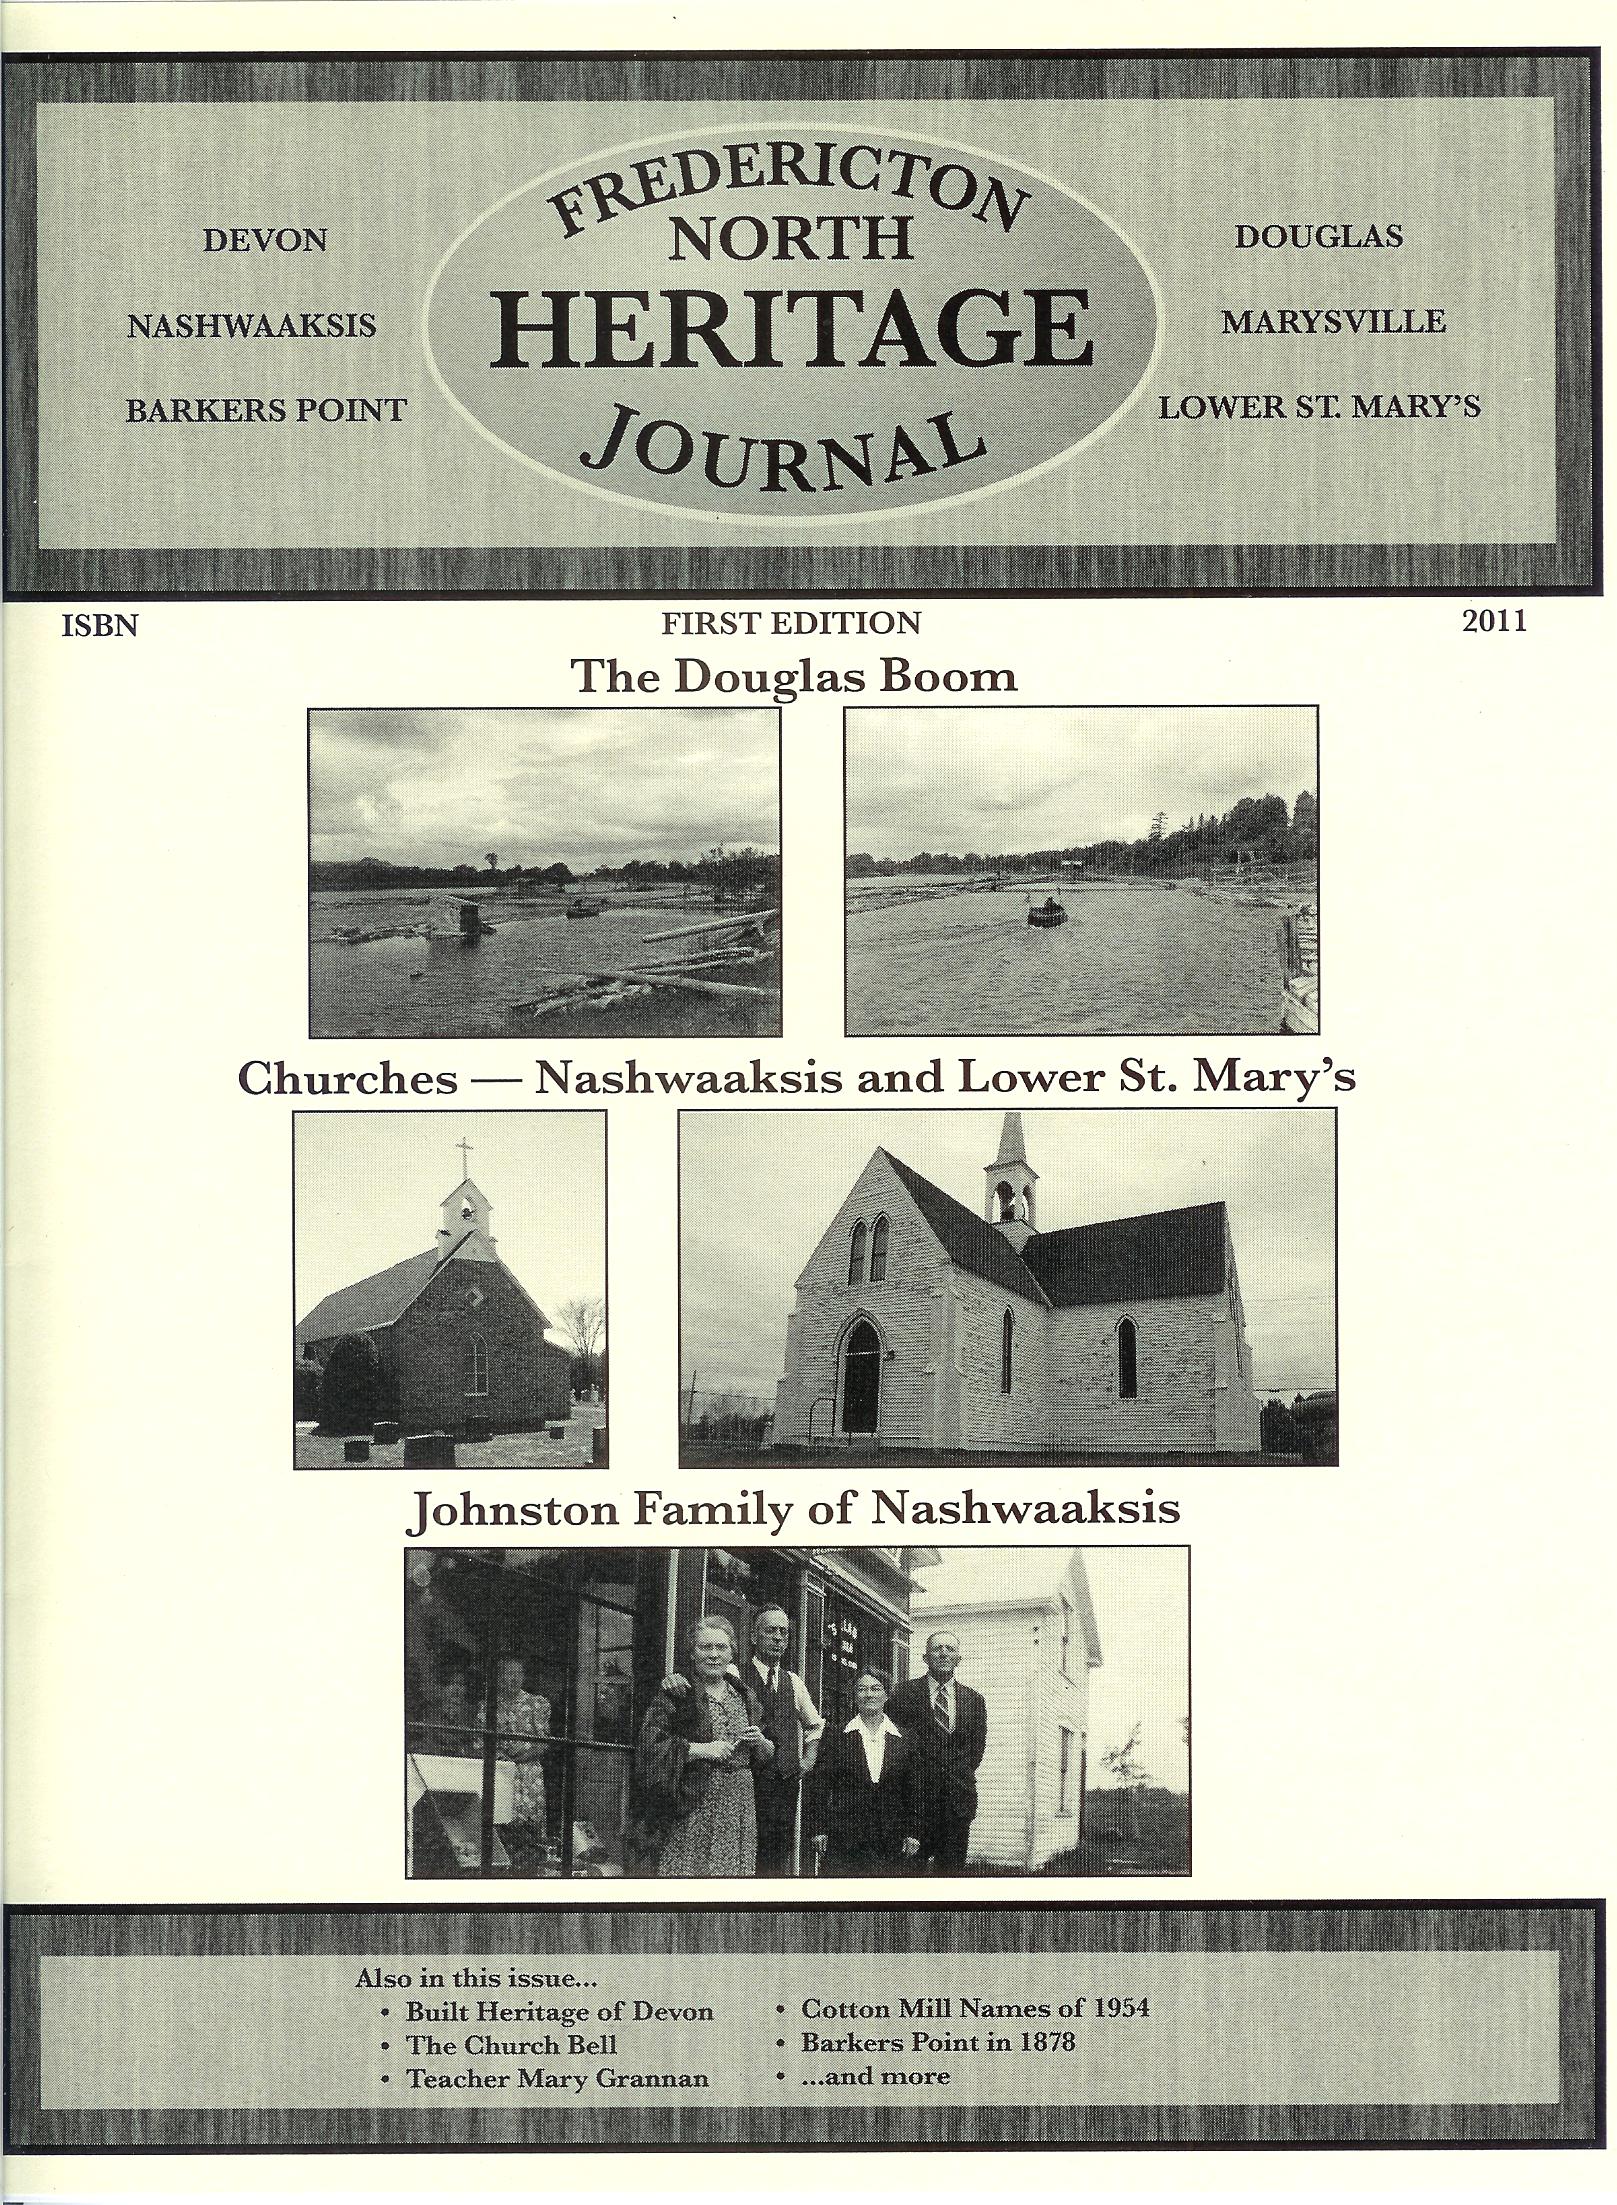 Fredericton North Heritage Journal 